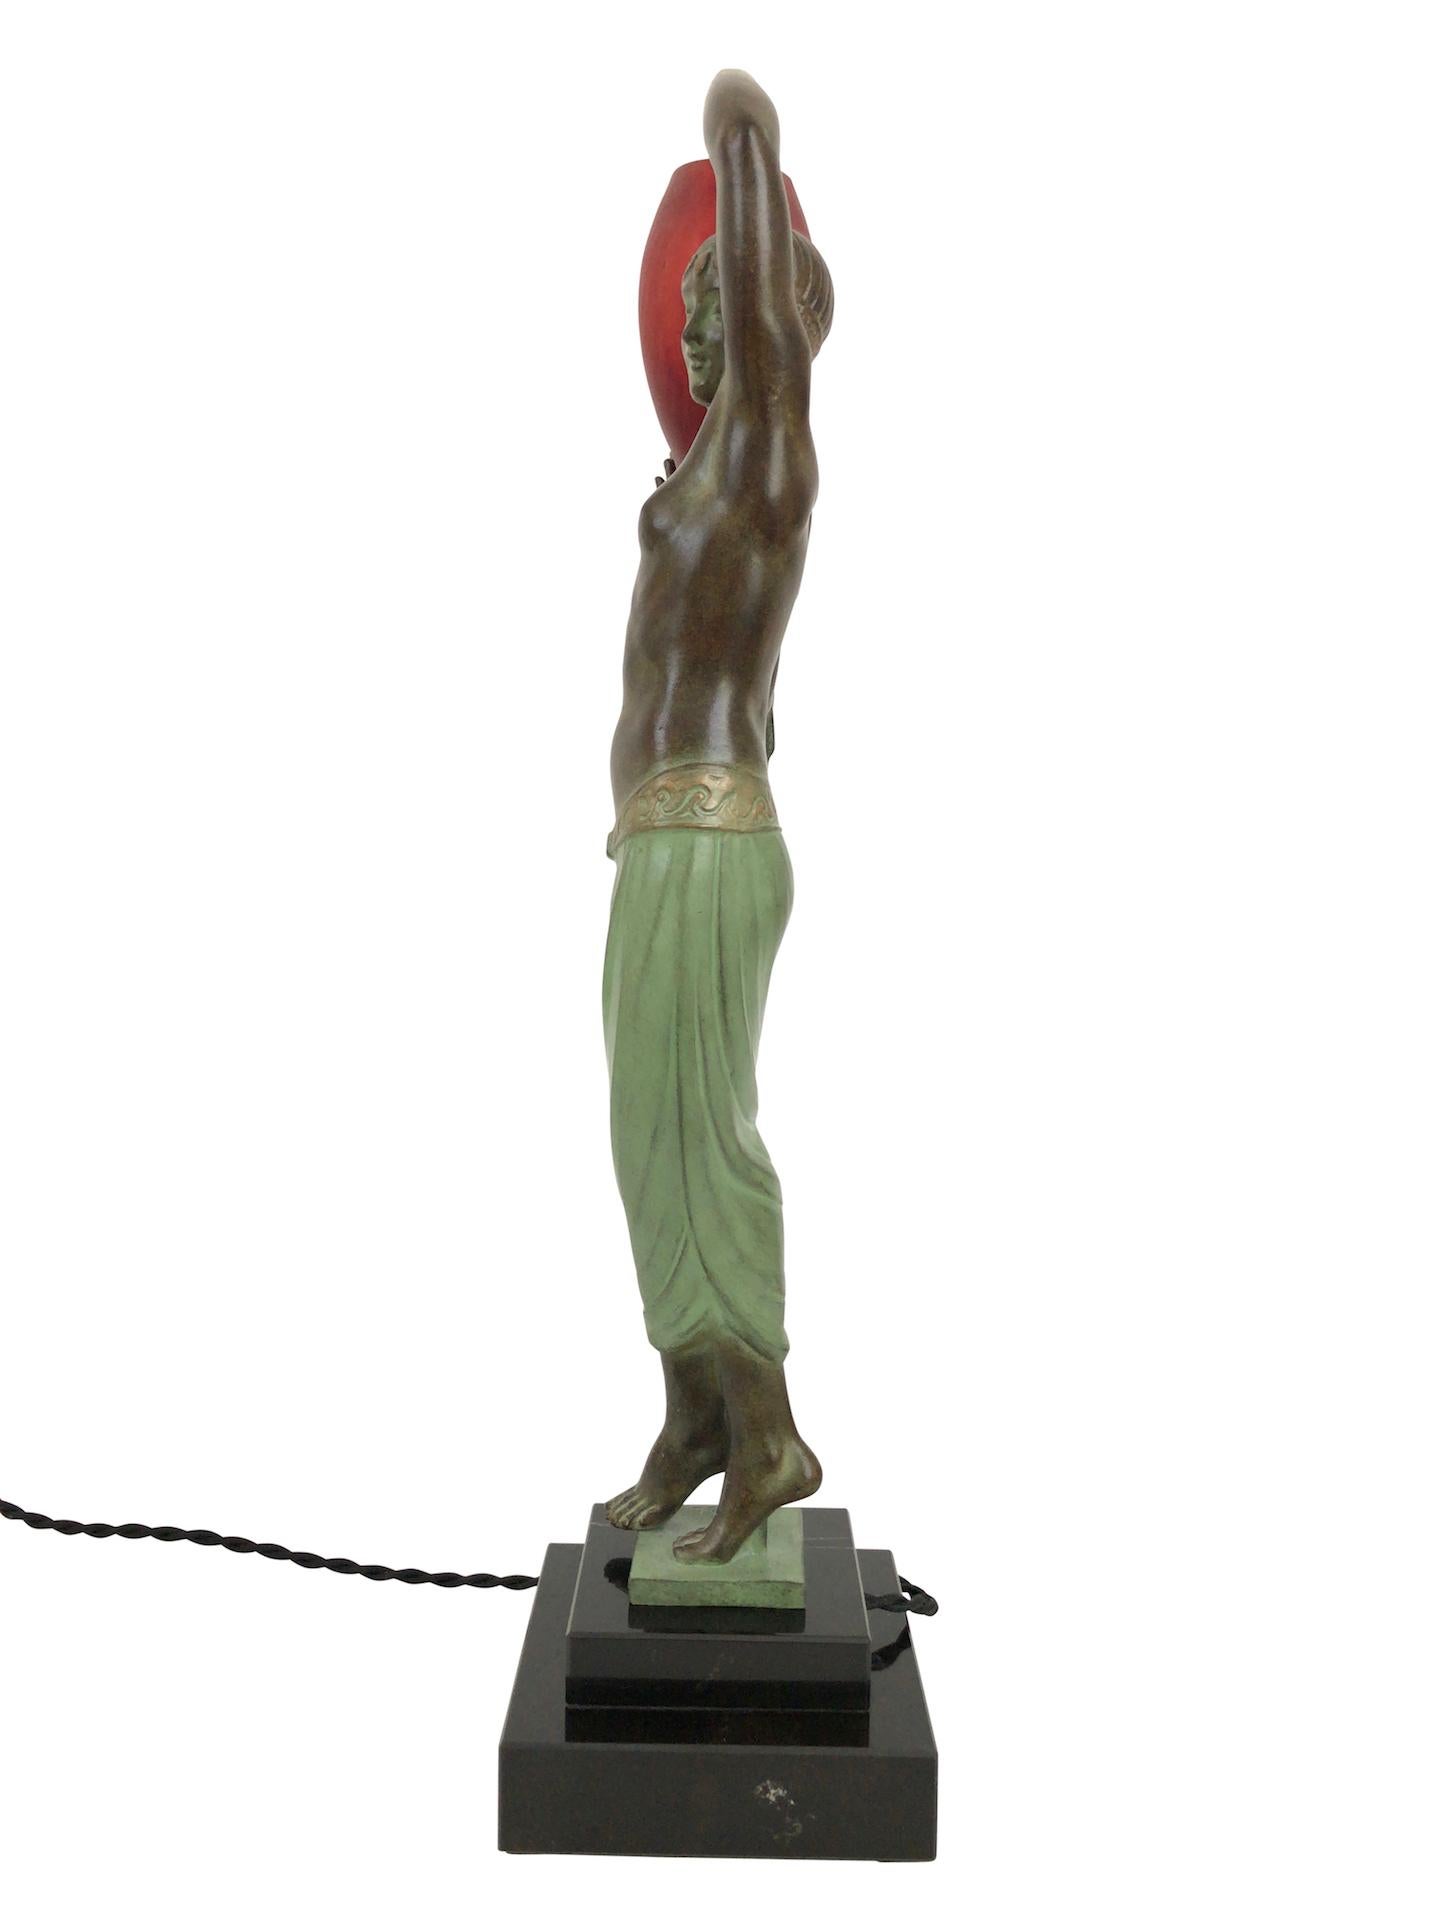 “Odalisque”
Designed in France during the roaring 1920s by “Fayral”, which is one of the pseudonymes from “Pierre Le Faguays” (1892-1962)
Original “Max Le Verrier”
Art Deco Style, France 

Lighted sculpture made in “Régule” (spelter)
Socle in black